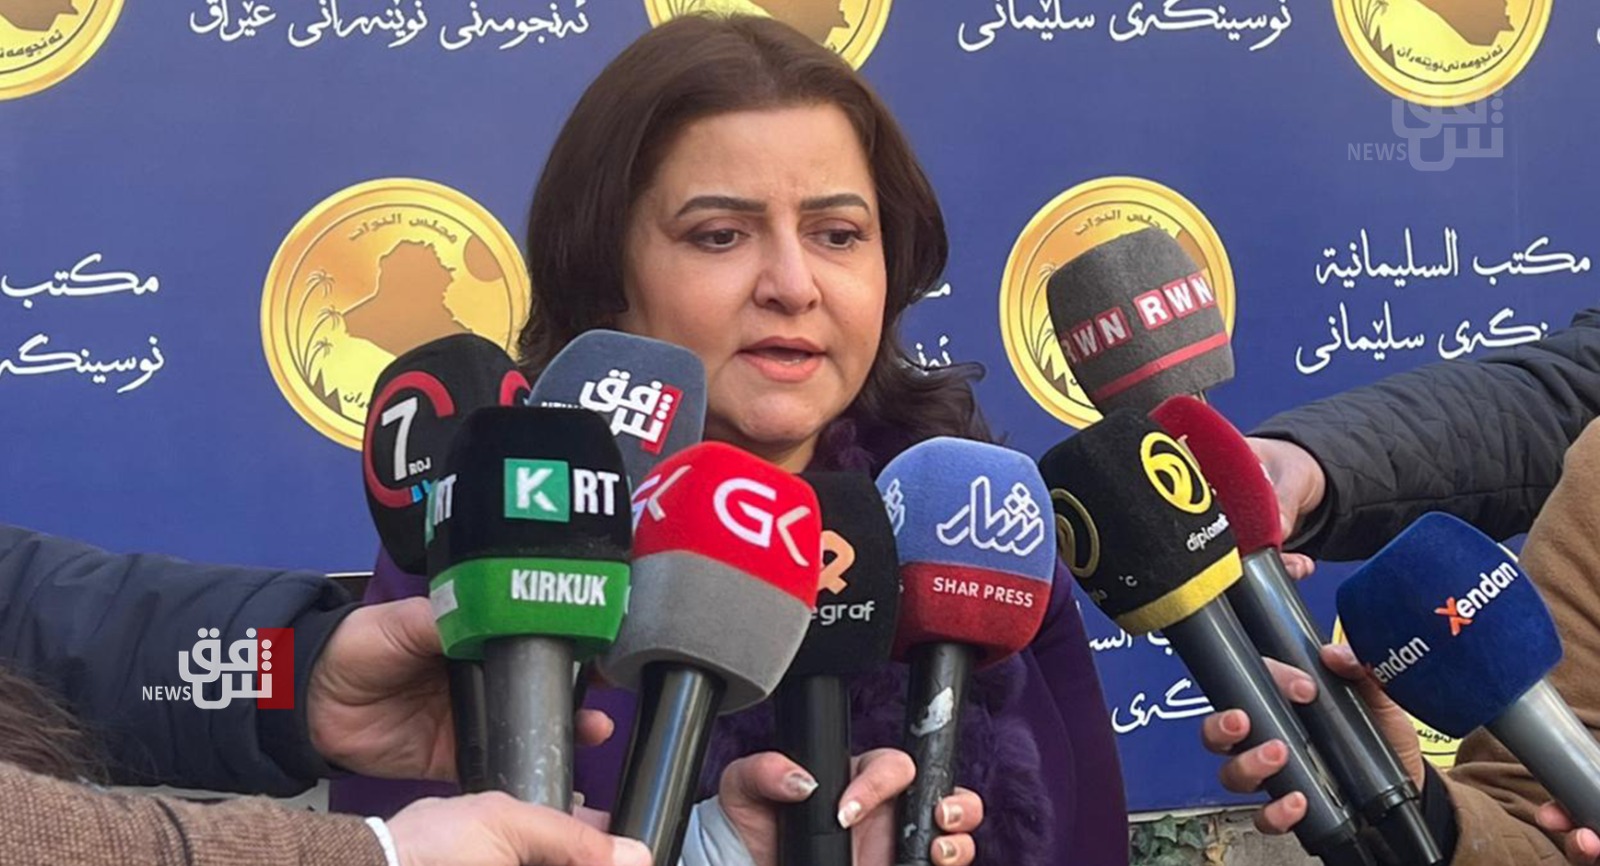 Deputy - The Kurdish blocs obligated the Sudanese government to implement Article 140 and pay the dues of Kurdish farmers